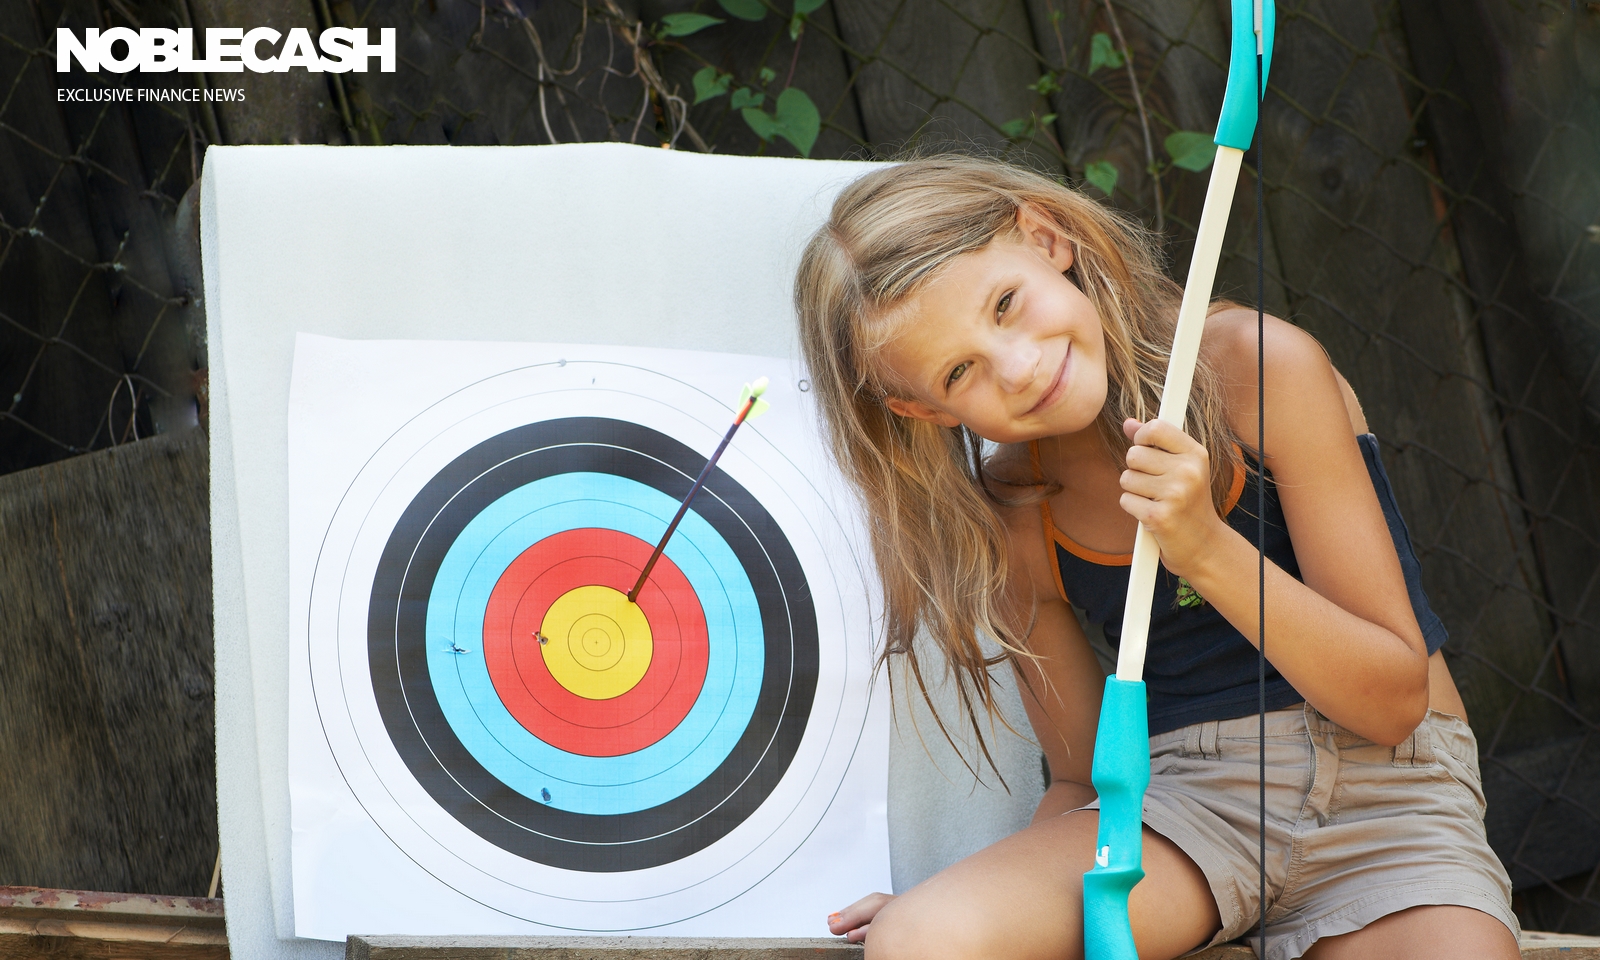 Girl with bow and sports aim